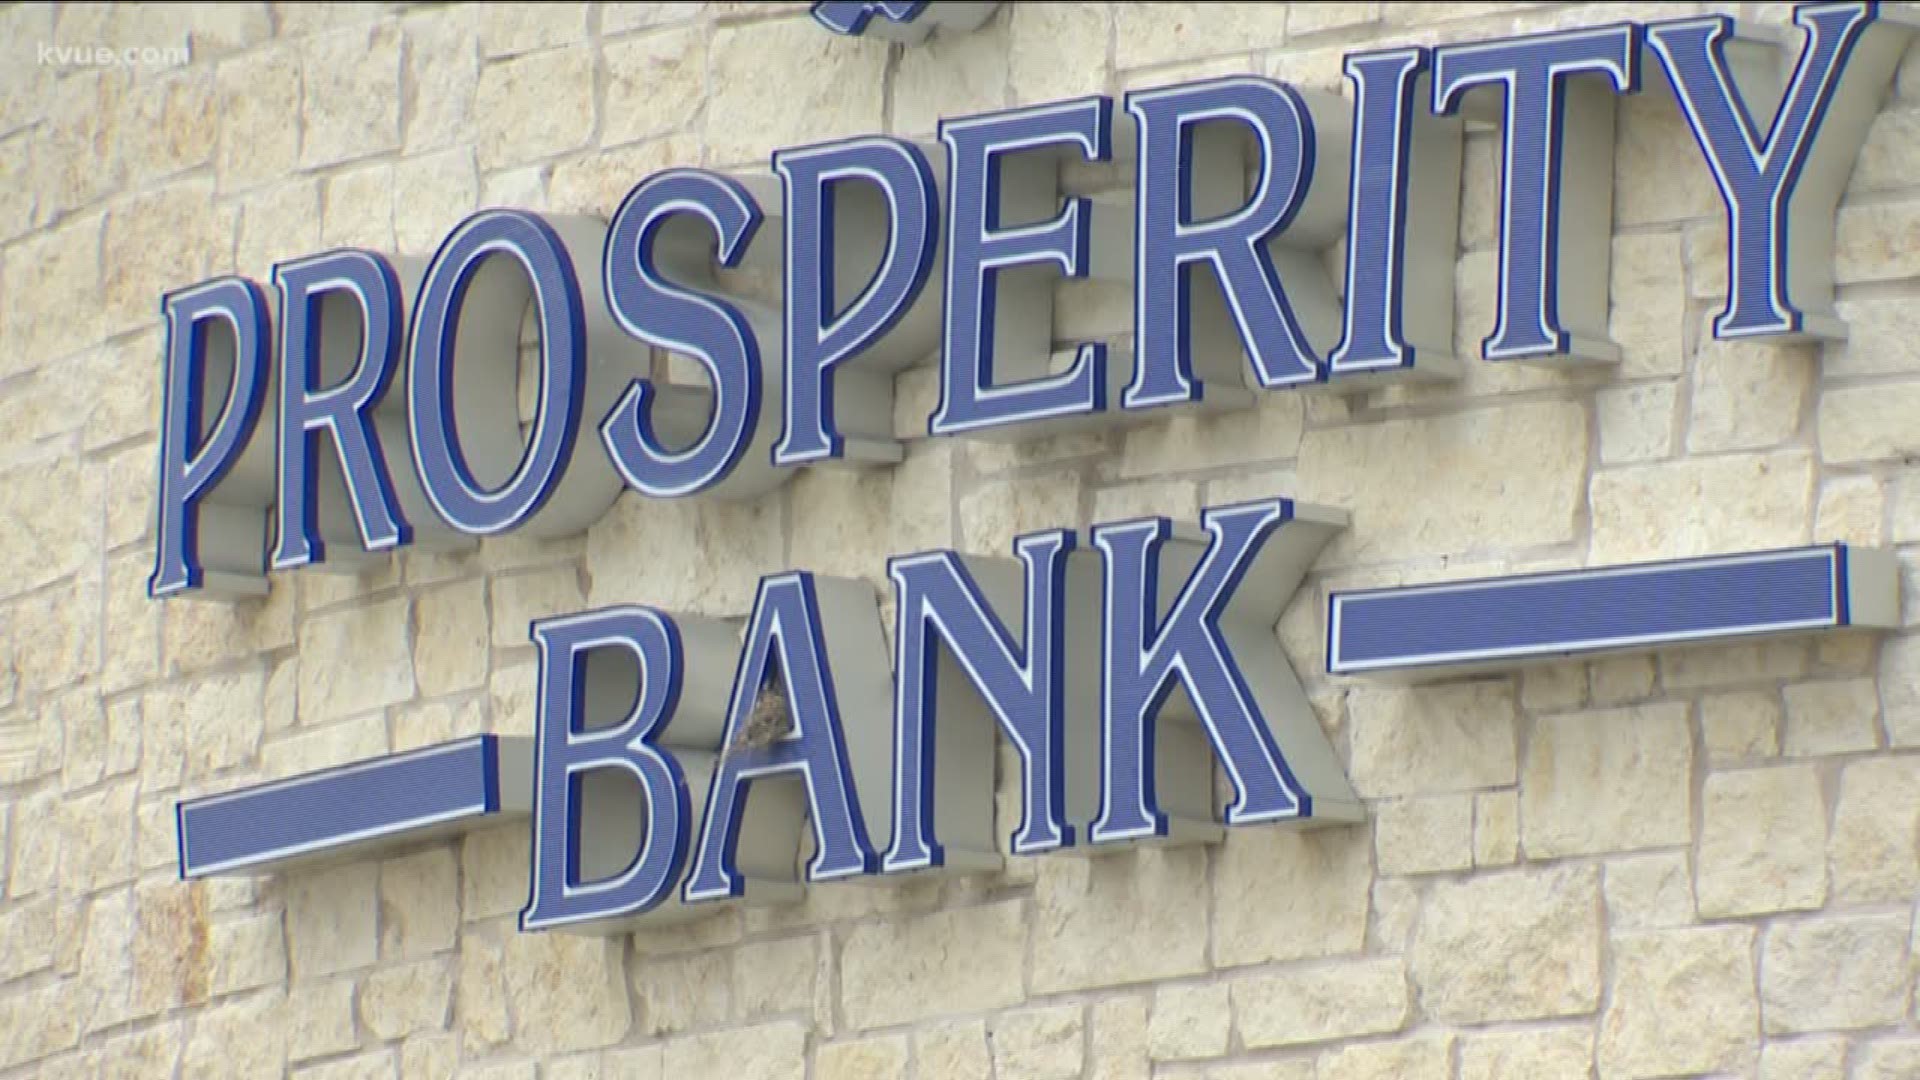 Austin's first bank robberies of 2019 happened just two hours apart.